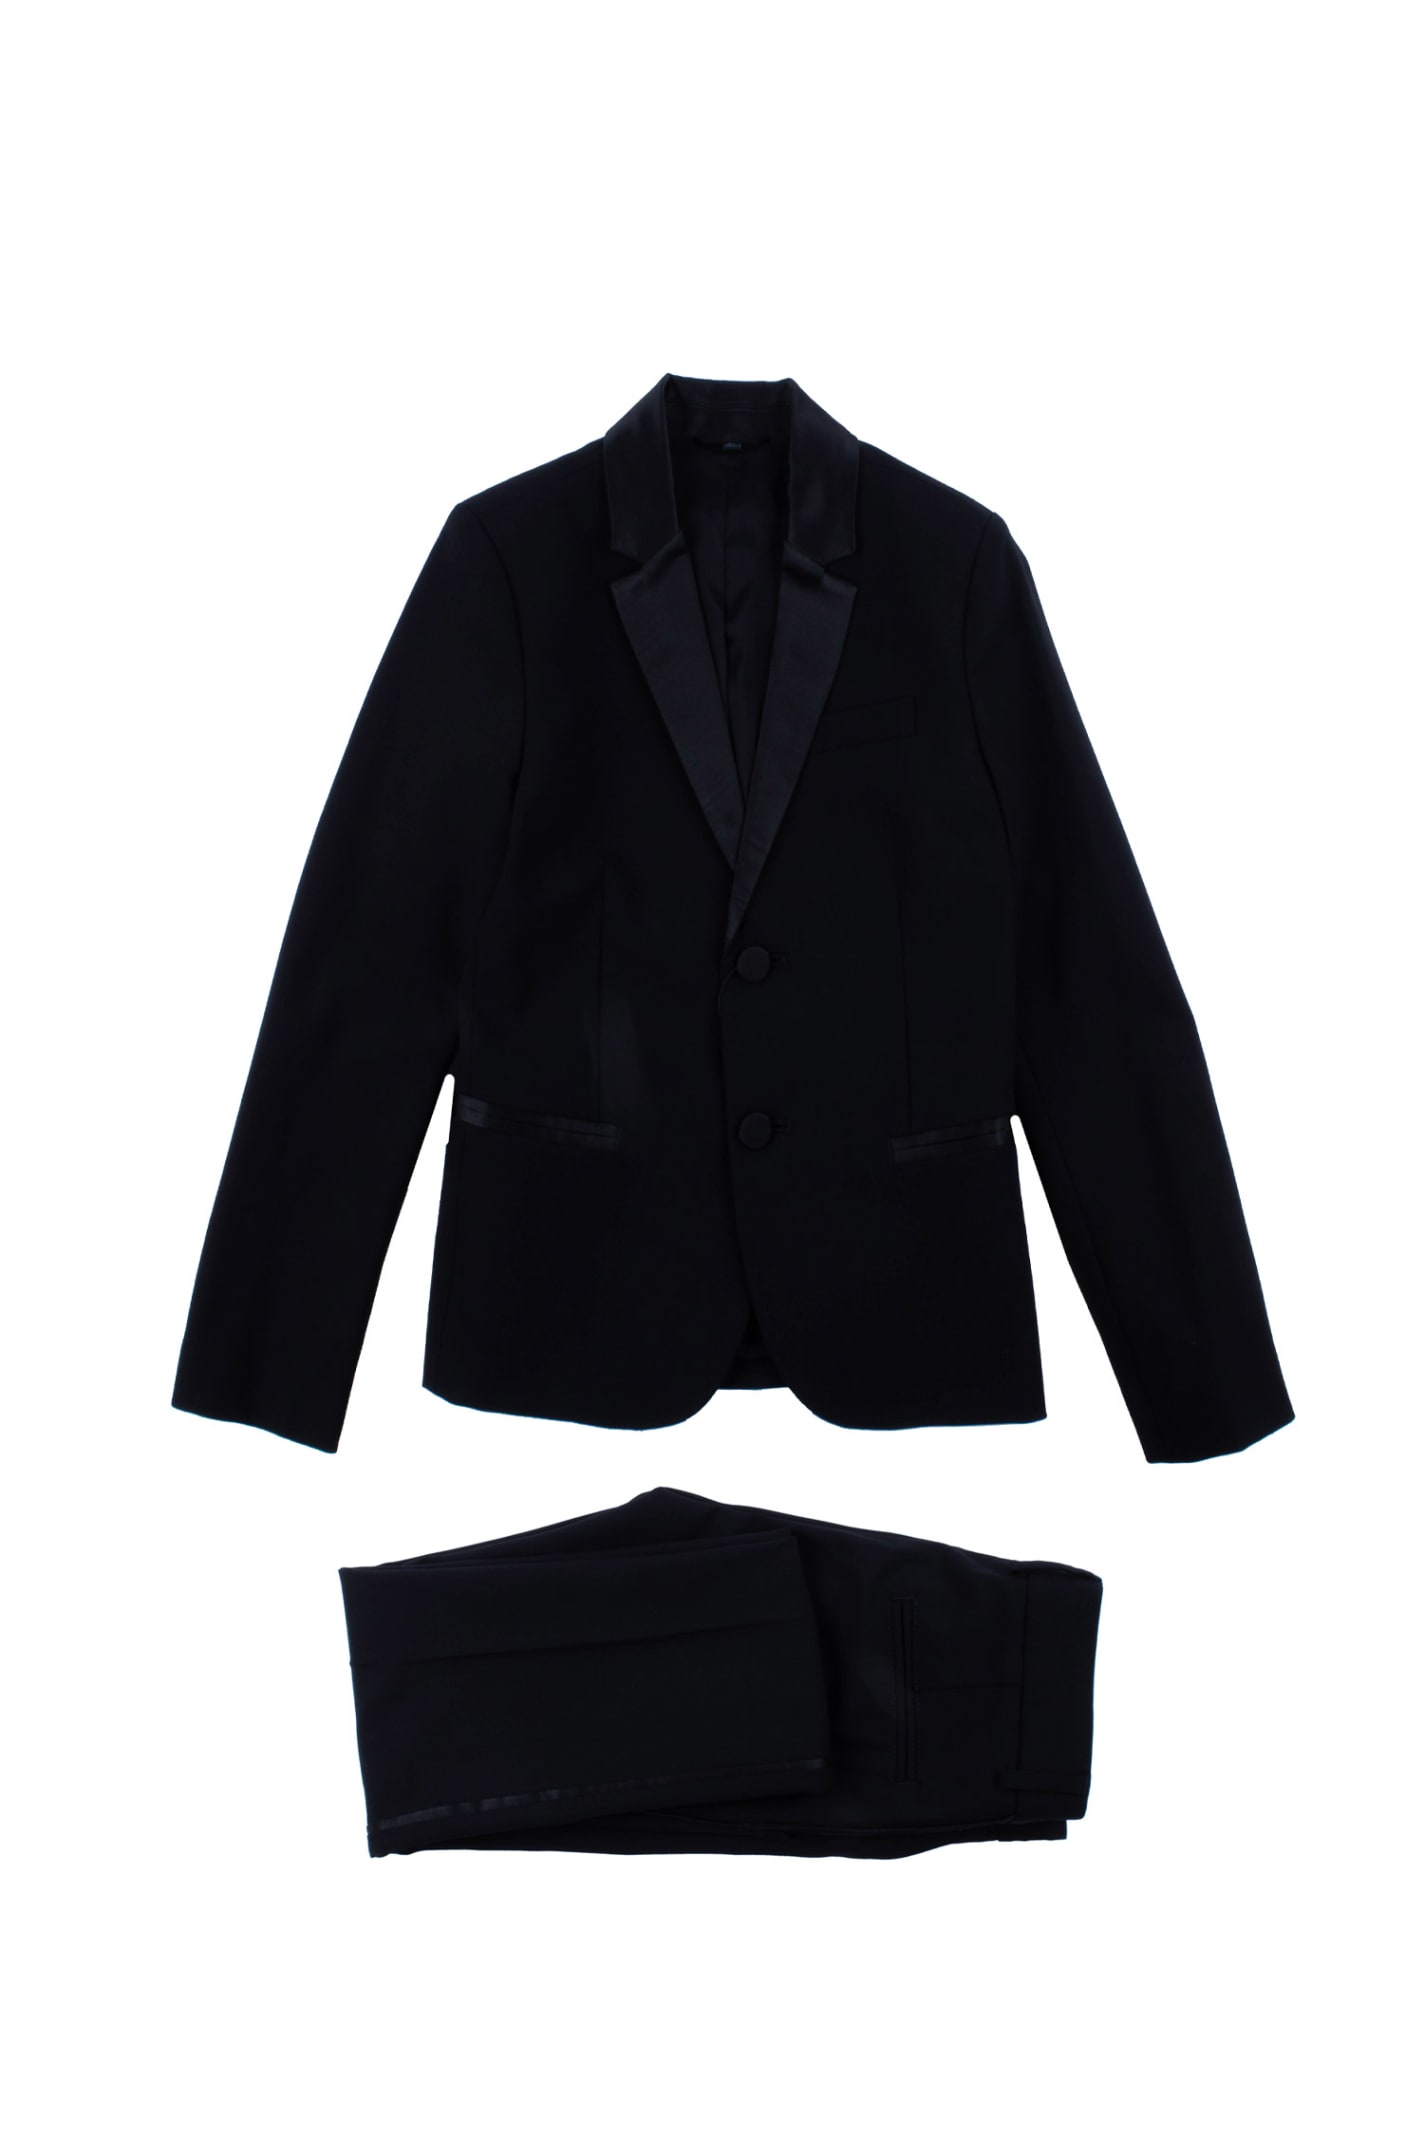 Emporio Armani Wool Blend Jacket And Pants